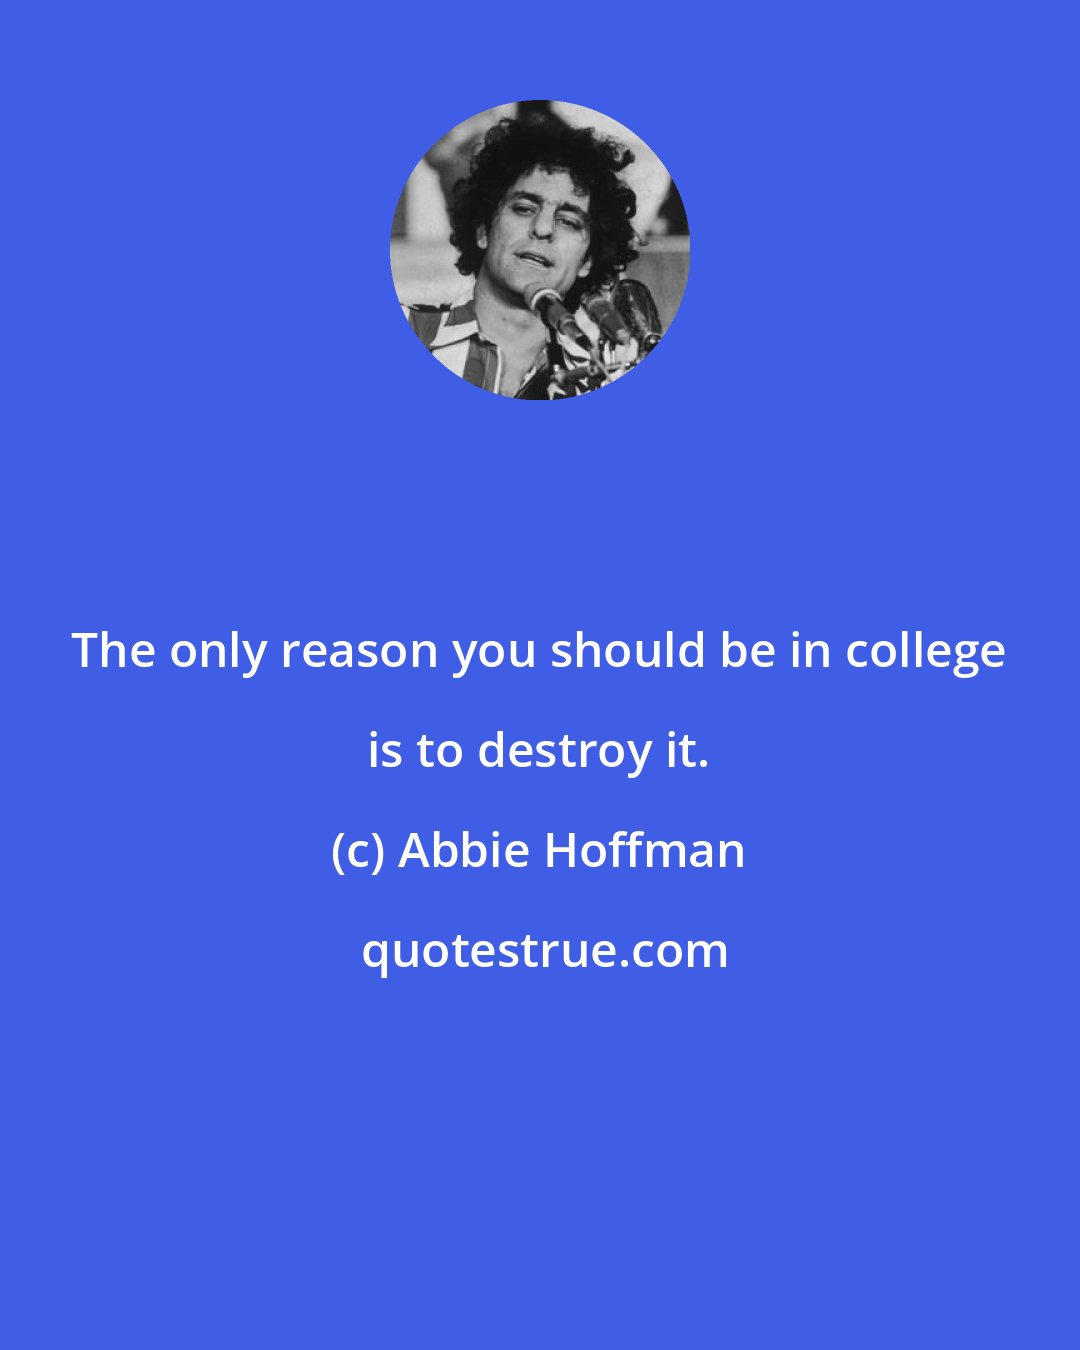 Abbie Hoffman: The only reason you should be in college is to destroy it.